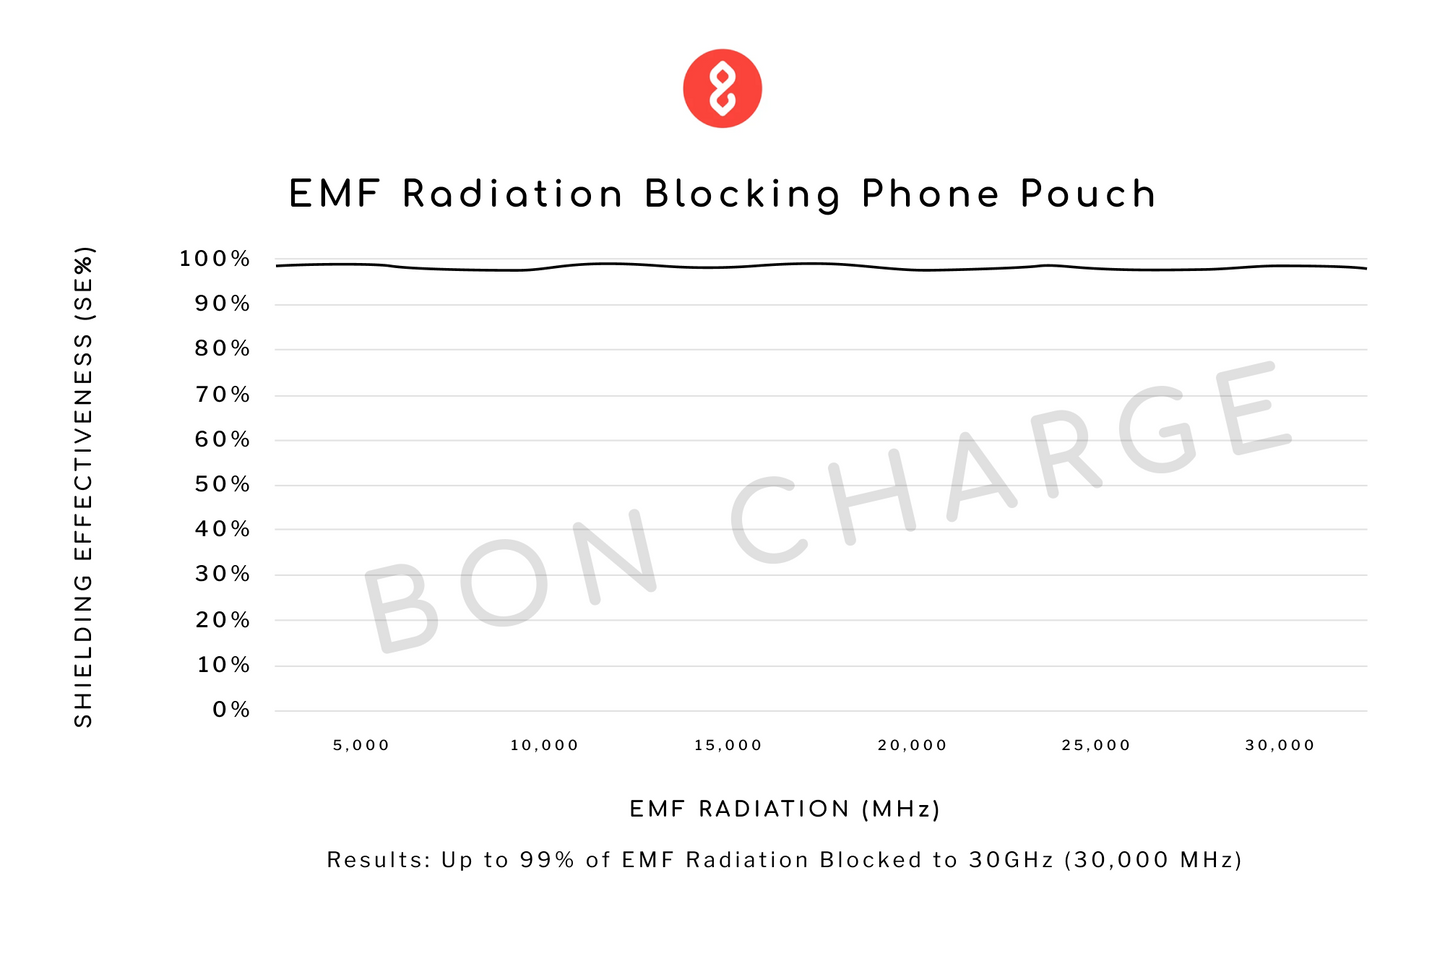 EMF Radiation Blocking Phone Pouch Cybersecurity, Privacy & EMP Attack Shield